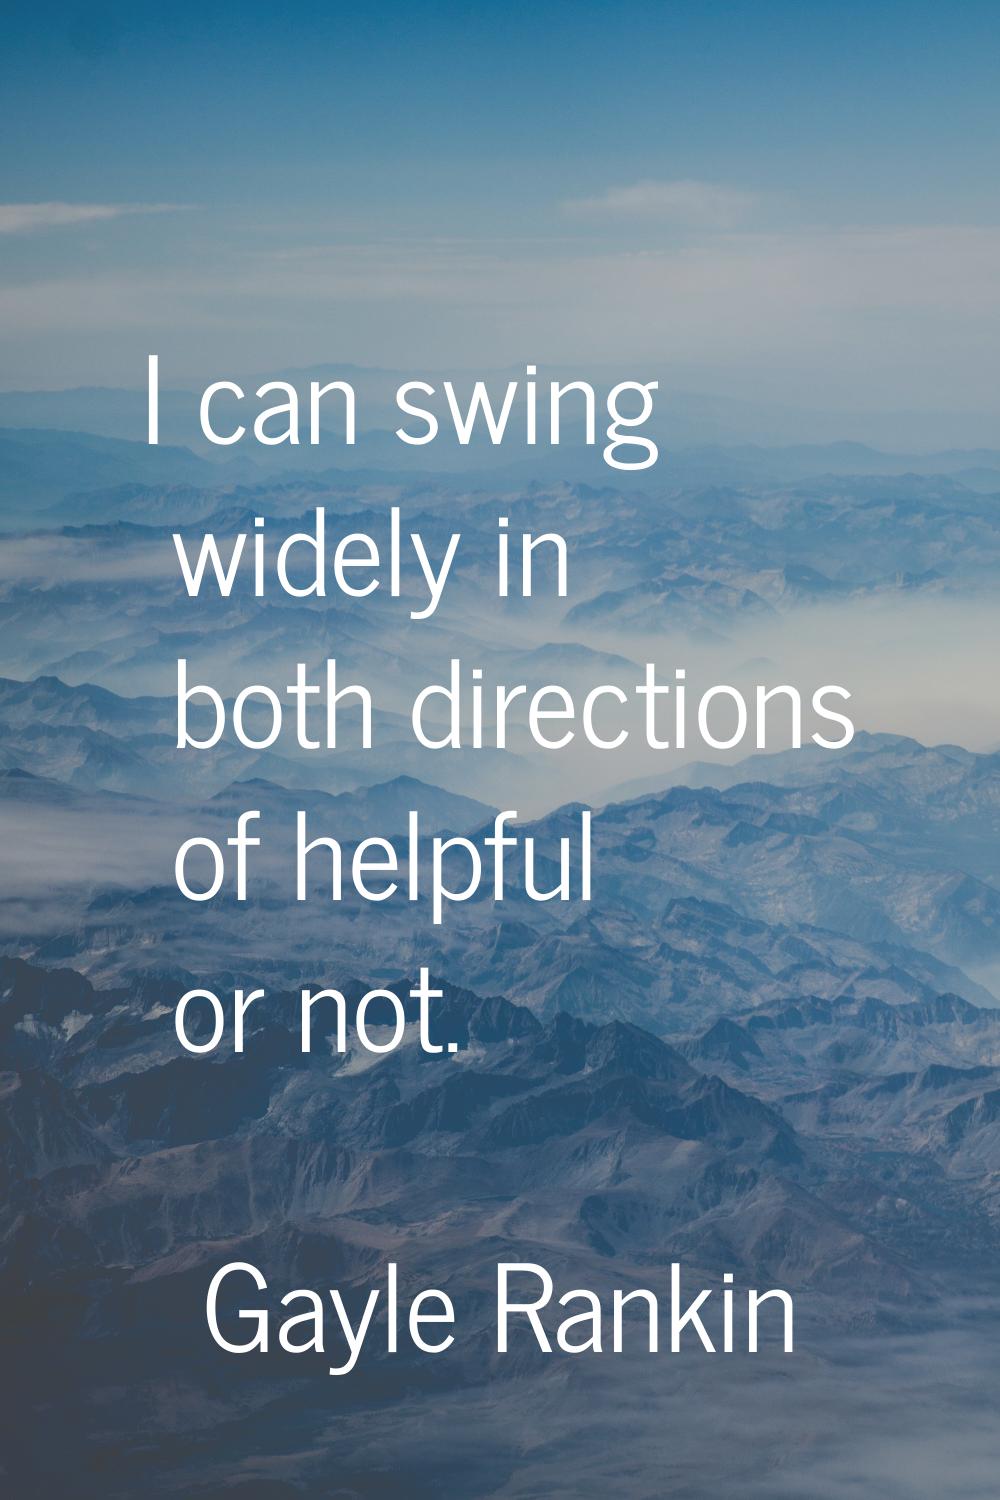 I can swing widely in both directions of helpful or not.